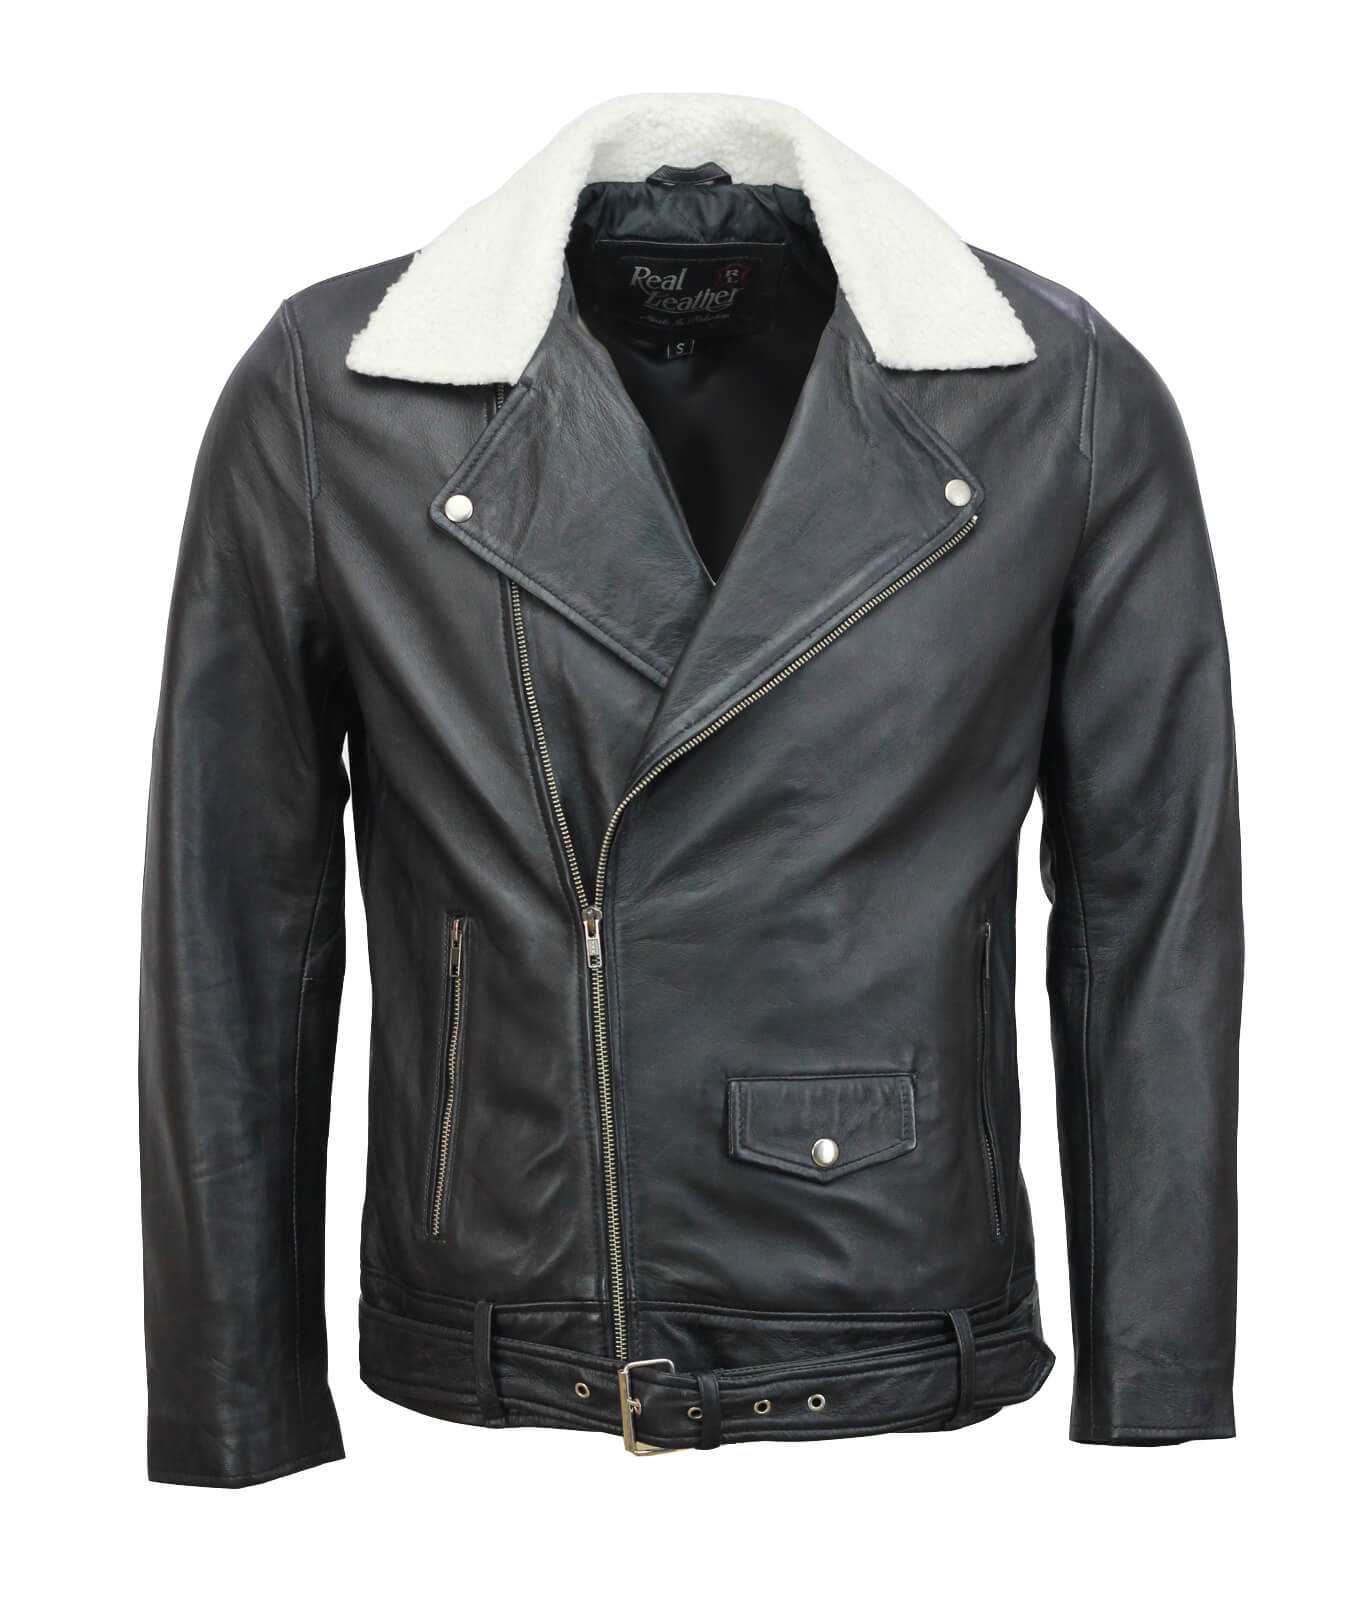 Black Motorcycle Genuine Leather Jacket With Fur Collar